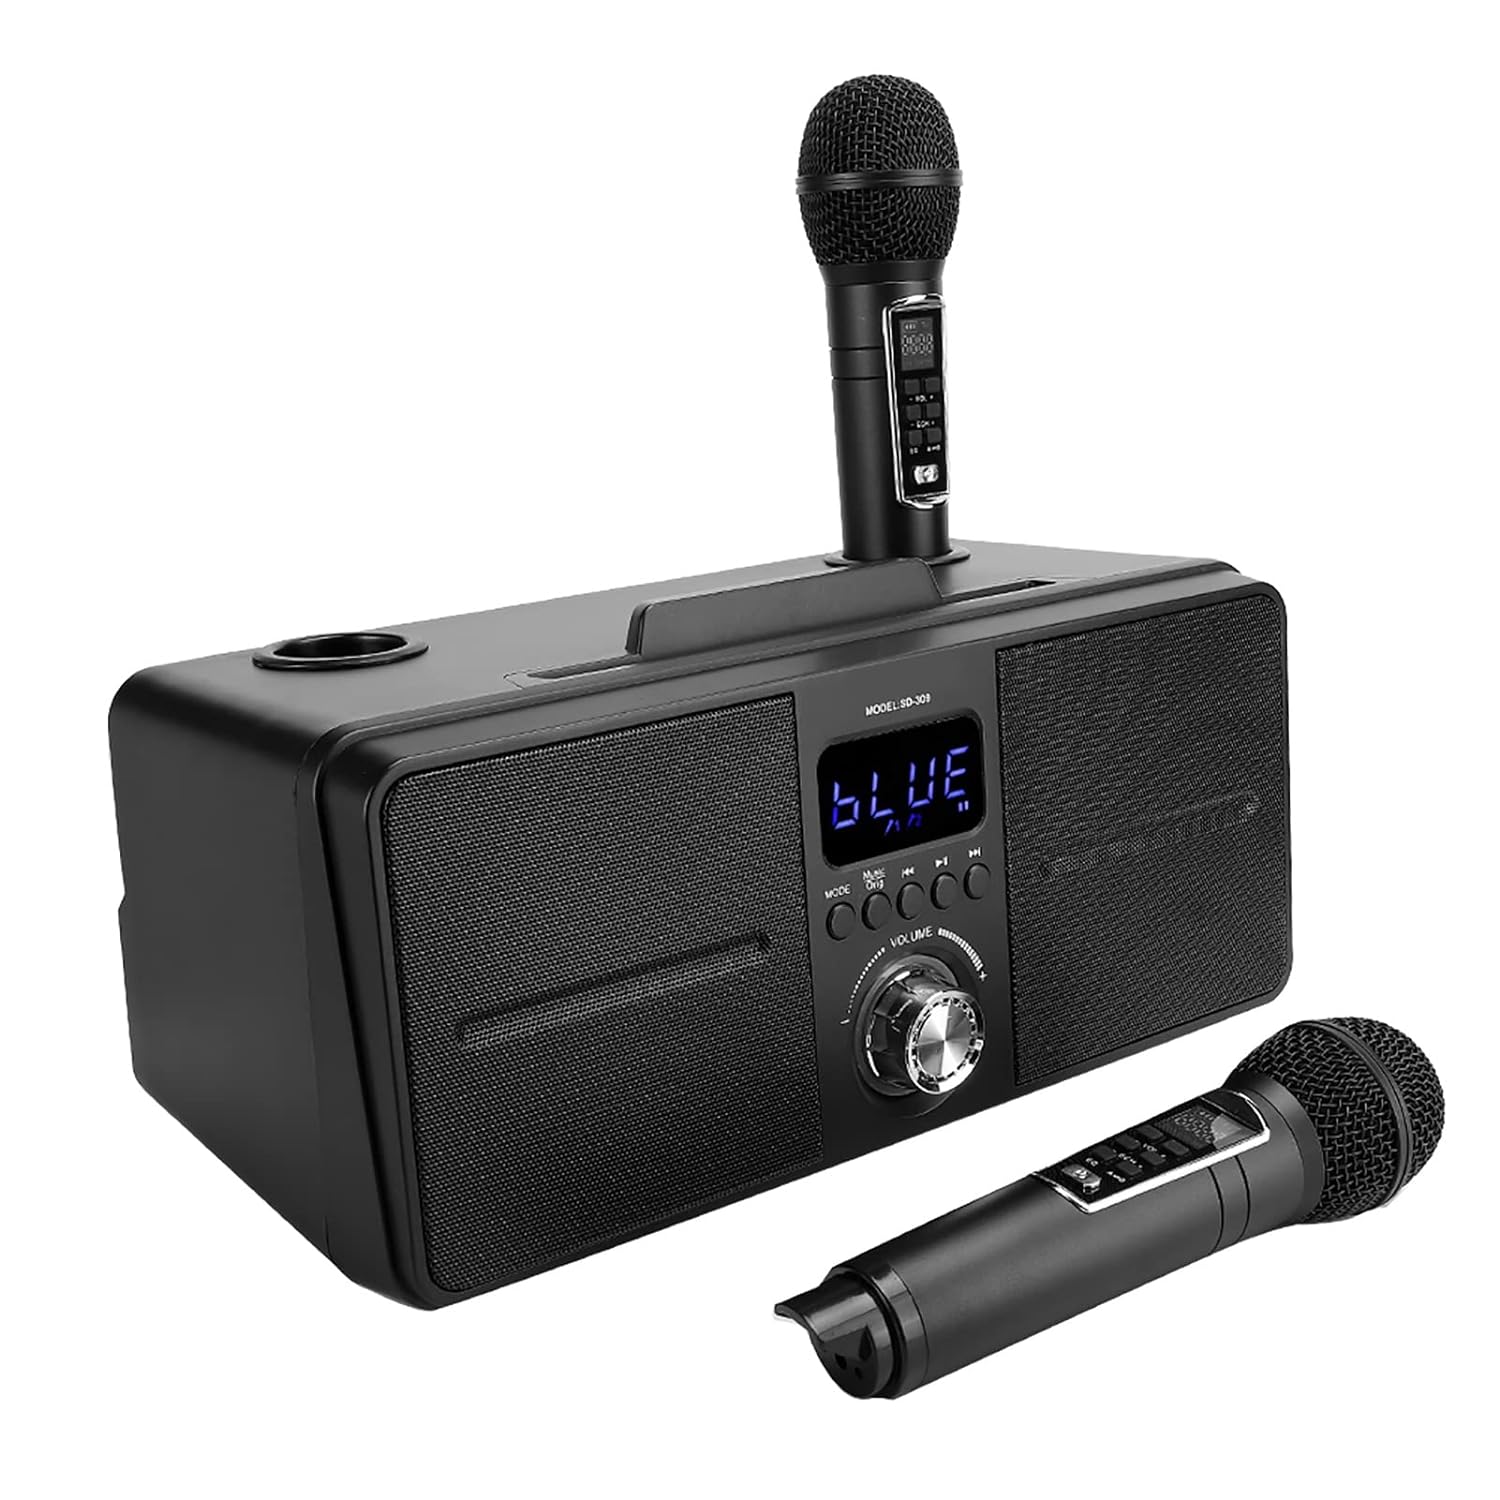 Karaoke Machine for Adults Kids, Portable Speaker with 2 Wireless Microphones, Karaoke Speaker Support SD Card, USB, AUX in, for Home Parties, Meetings, Birthday (Black)